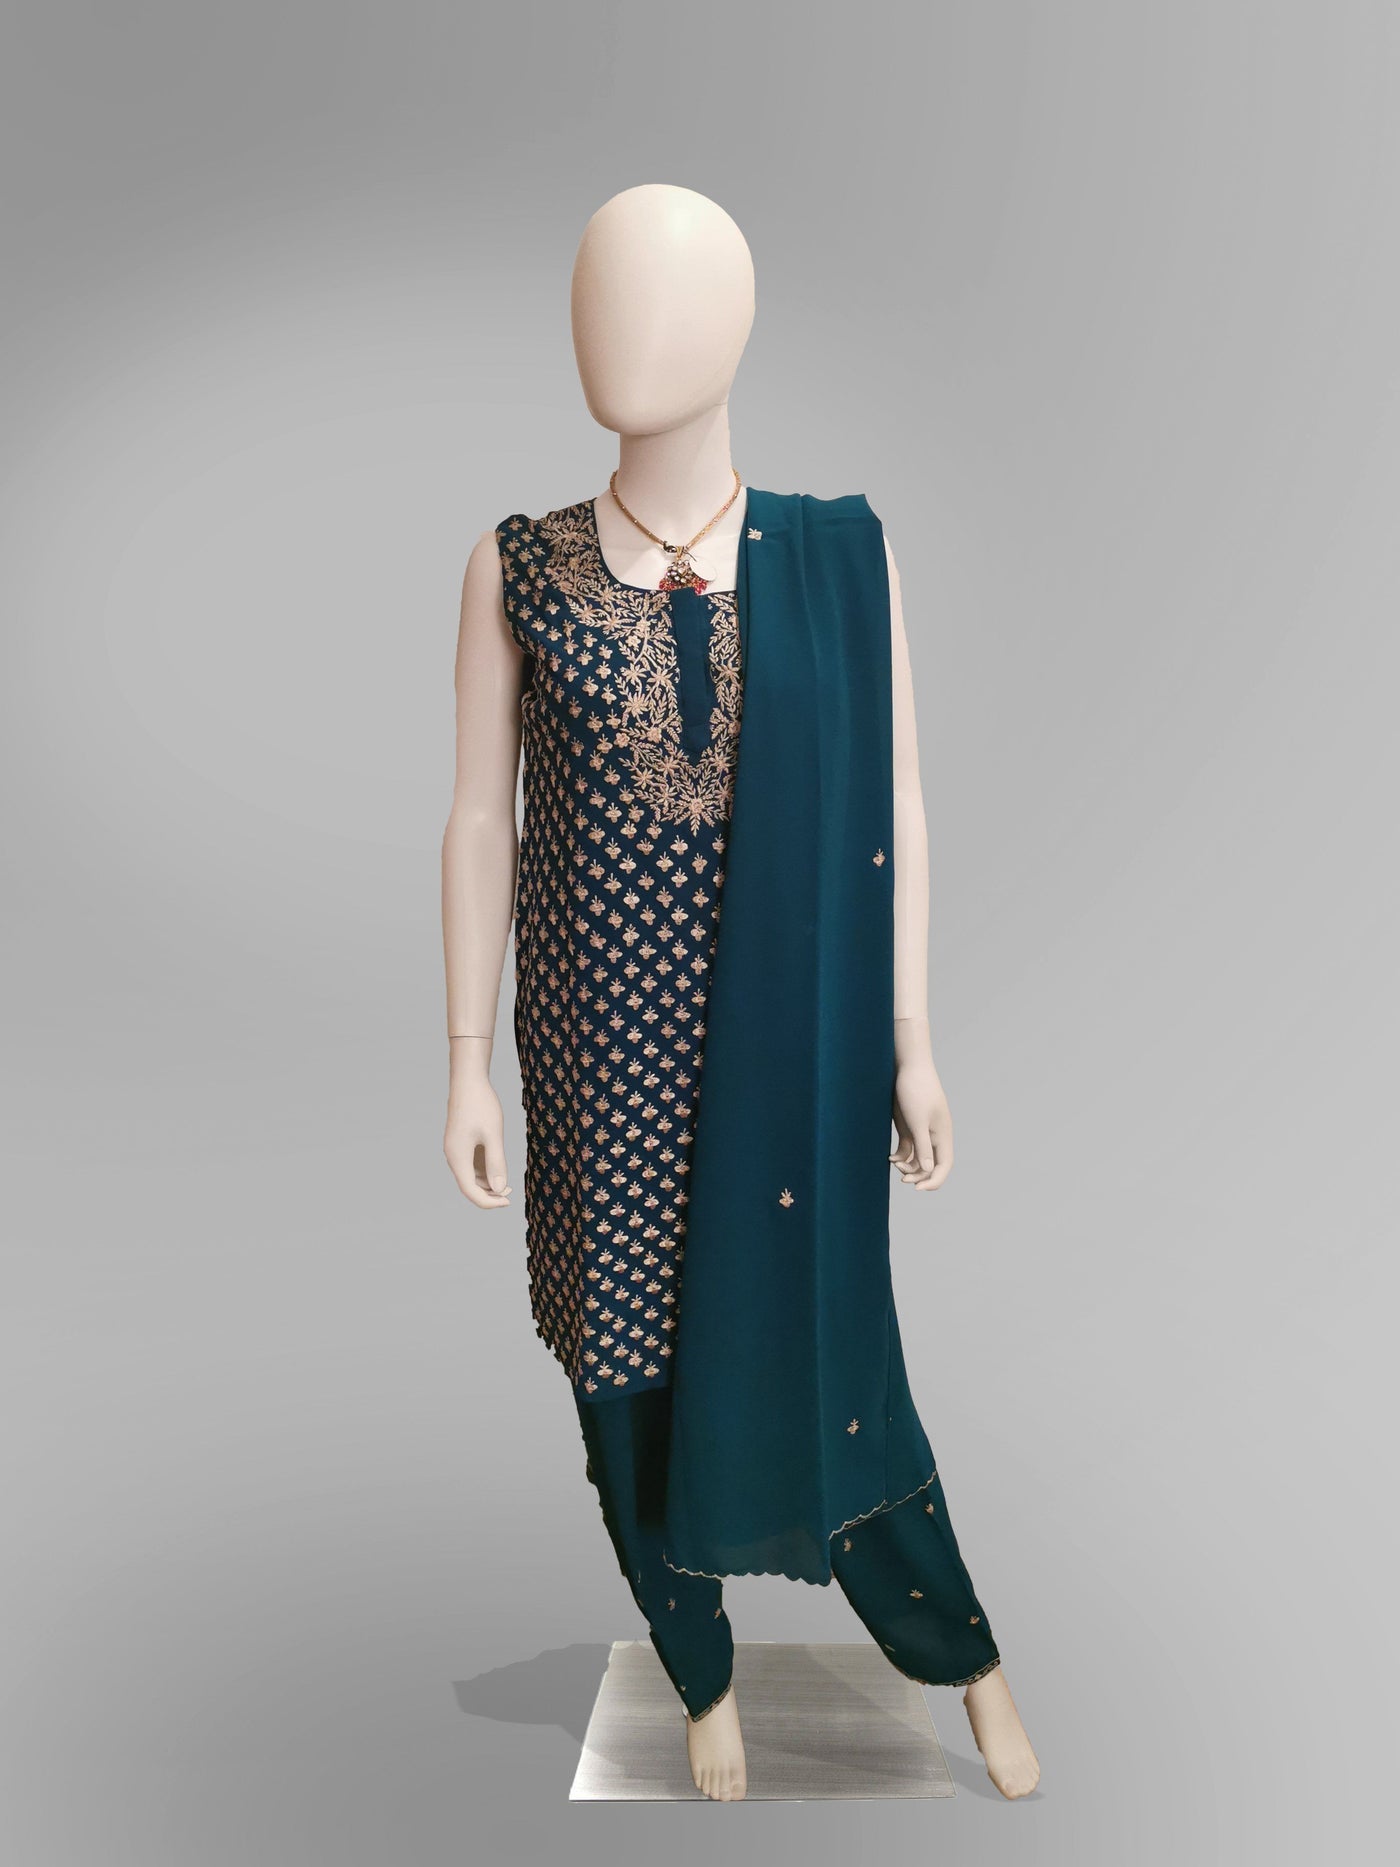 Salwar-Kameez in Pine Green with Heavy Gold Embroidery Work - Indian Clothing in Denver, CO, Aurora, CO, Boulder, CO, Fort Collins, CO, Colorado Springs, CO, Parker, CO, Highlands Ranch, CO, Cherry Creek, CO, Centennial, CO, and Longmont, CO. Nationwide shipping USA - India Fashion X